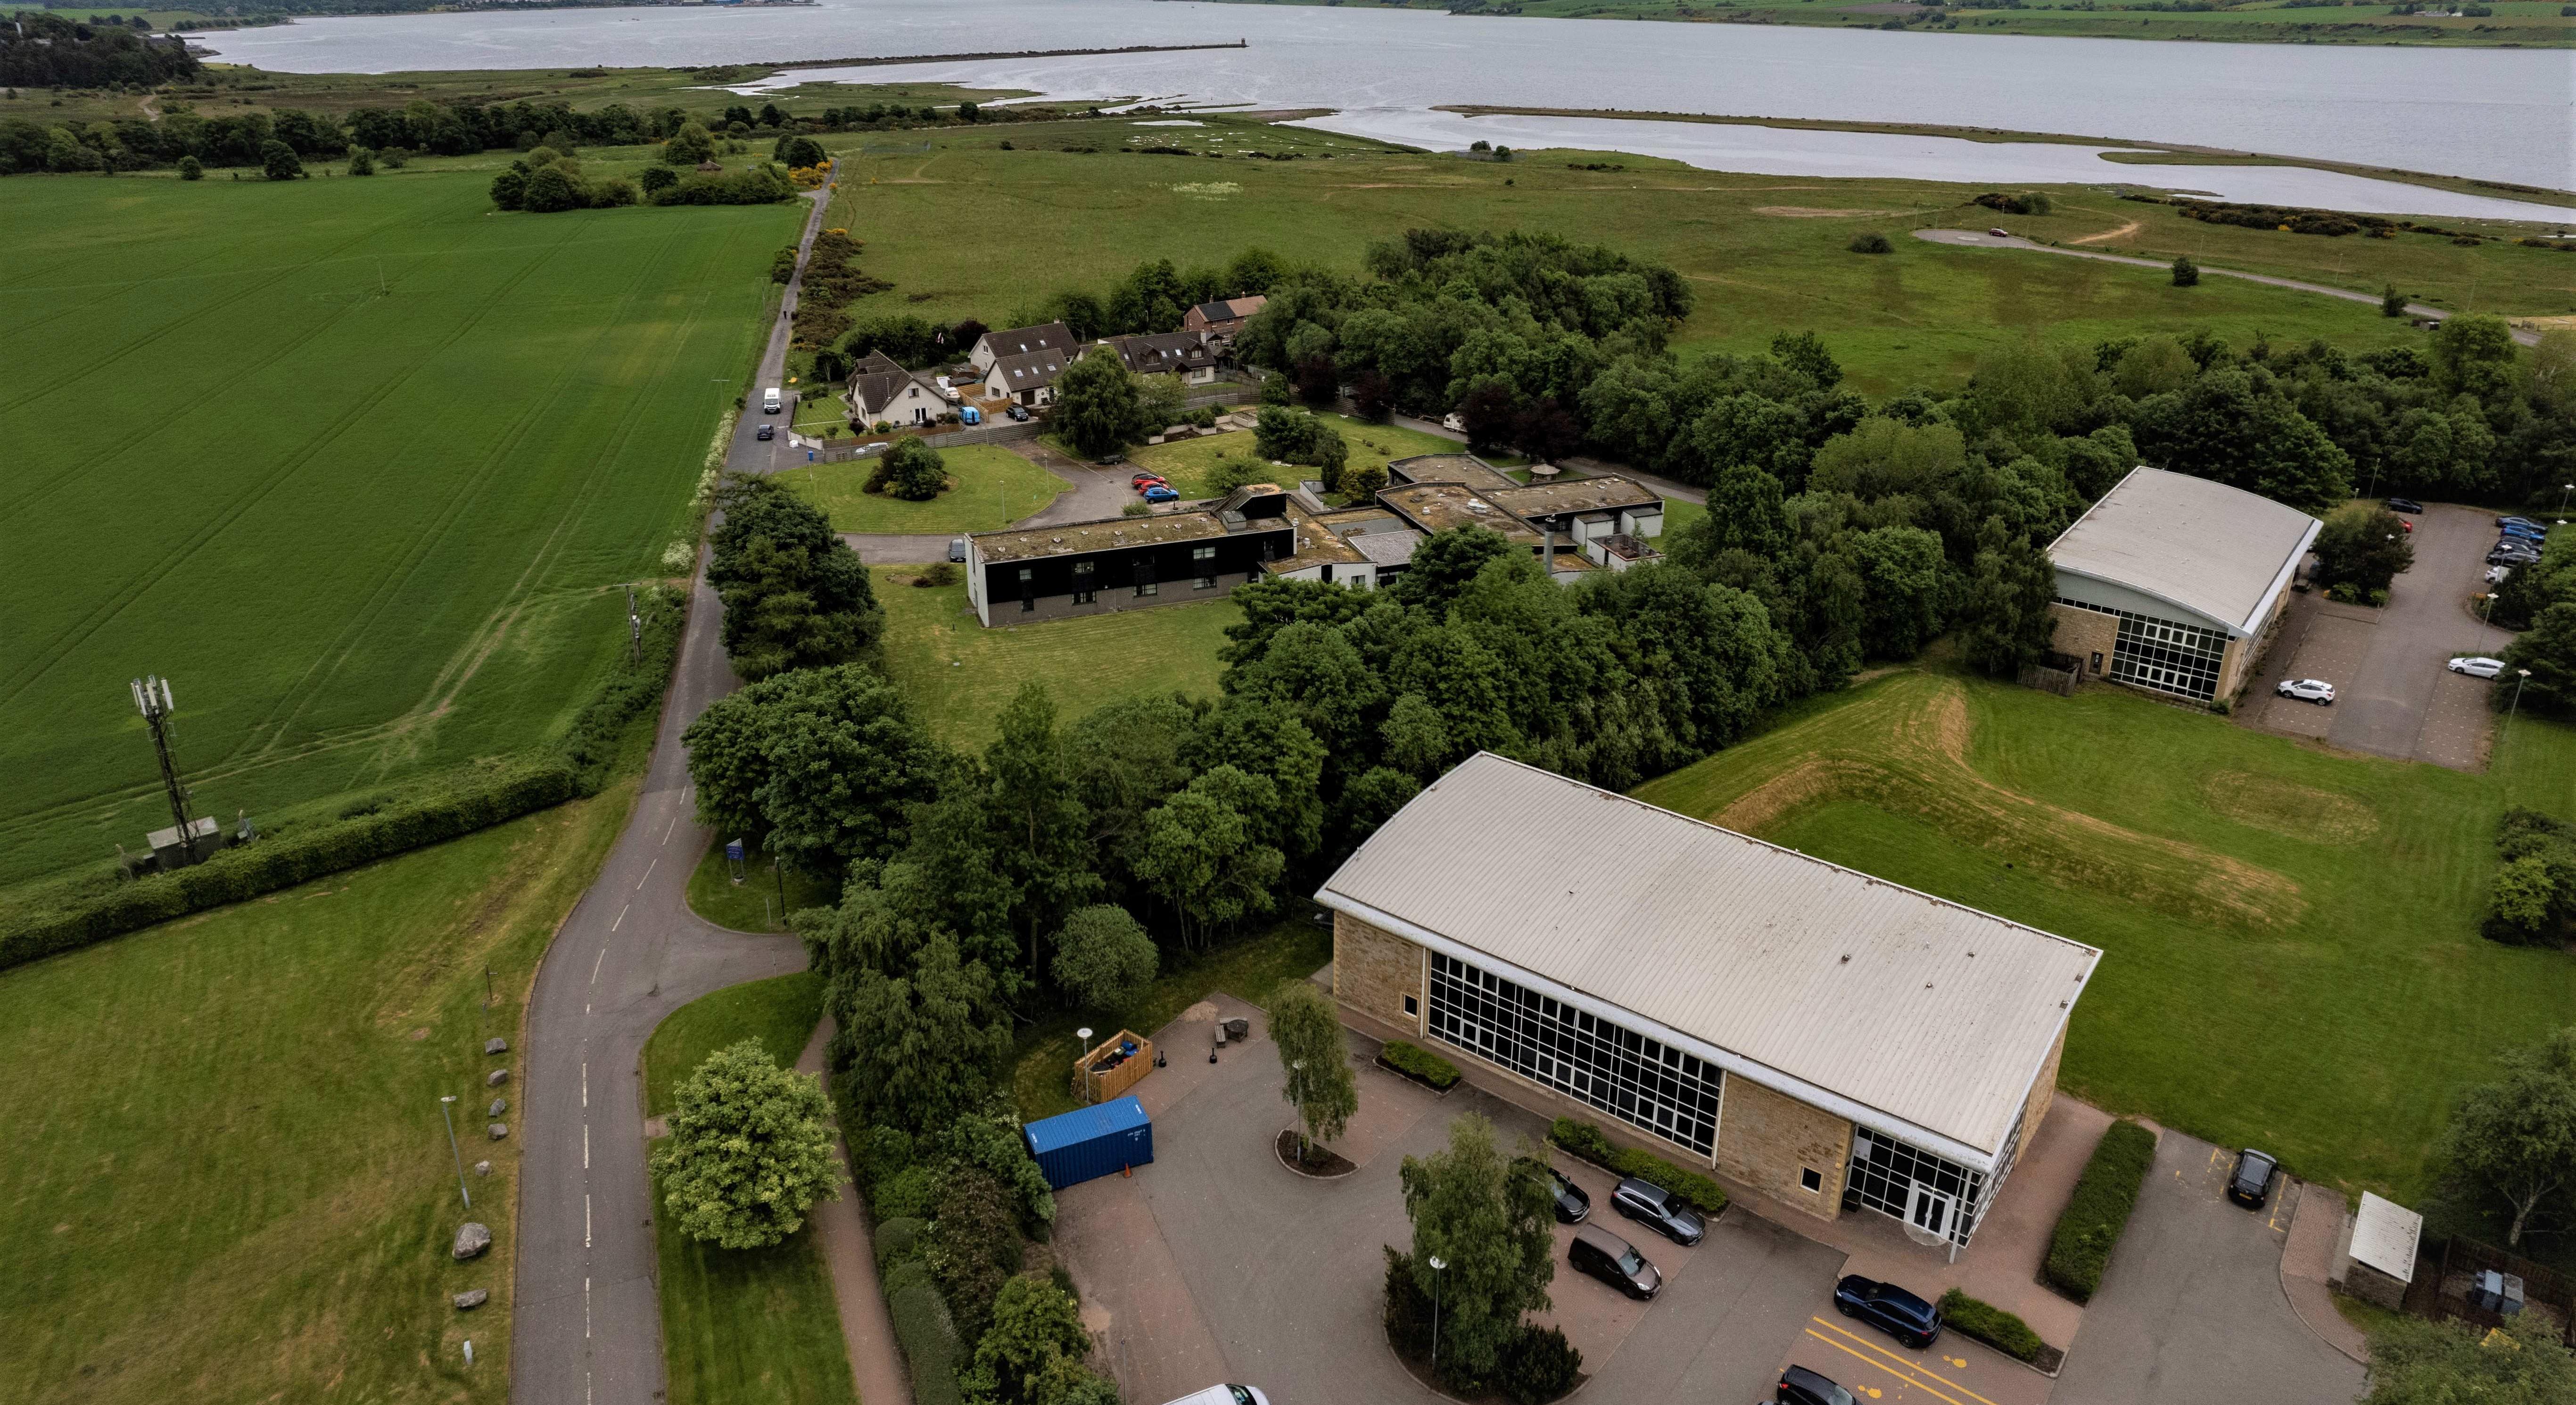 Drone image of Alness Campus